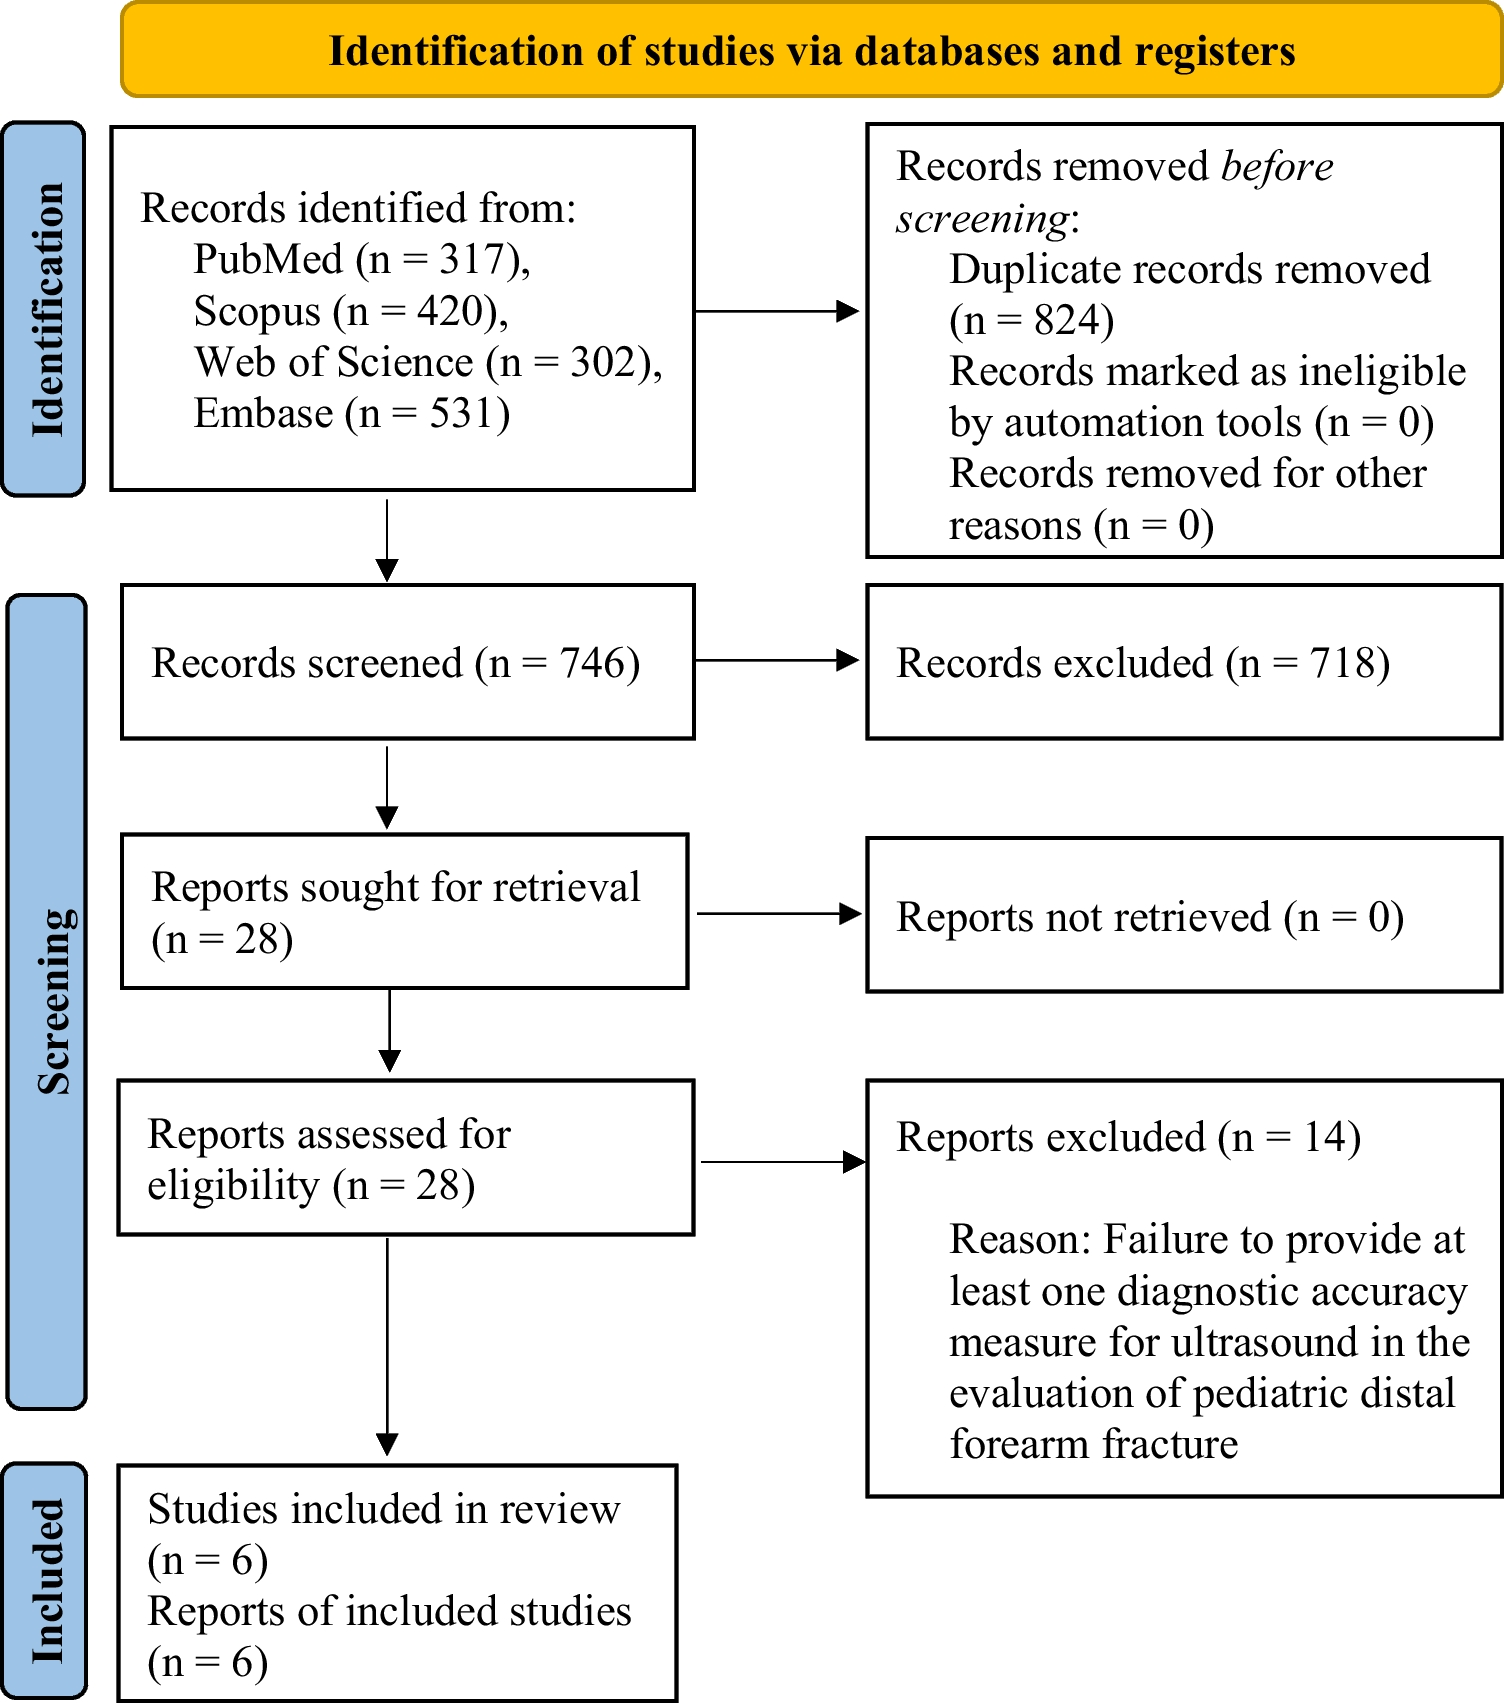 A meta-analysis on the diagnostic utility of ultrasound in pediatric distal forearm fractures